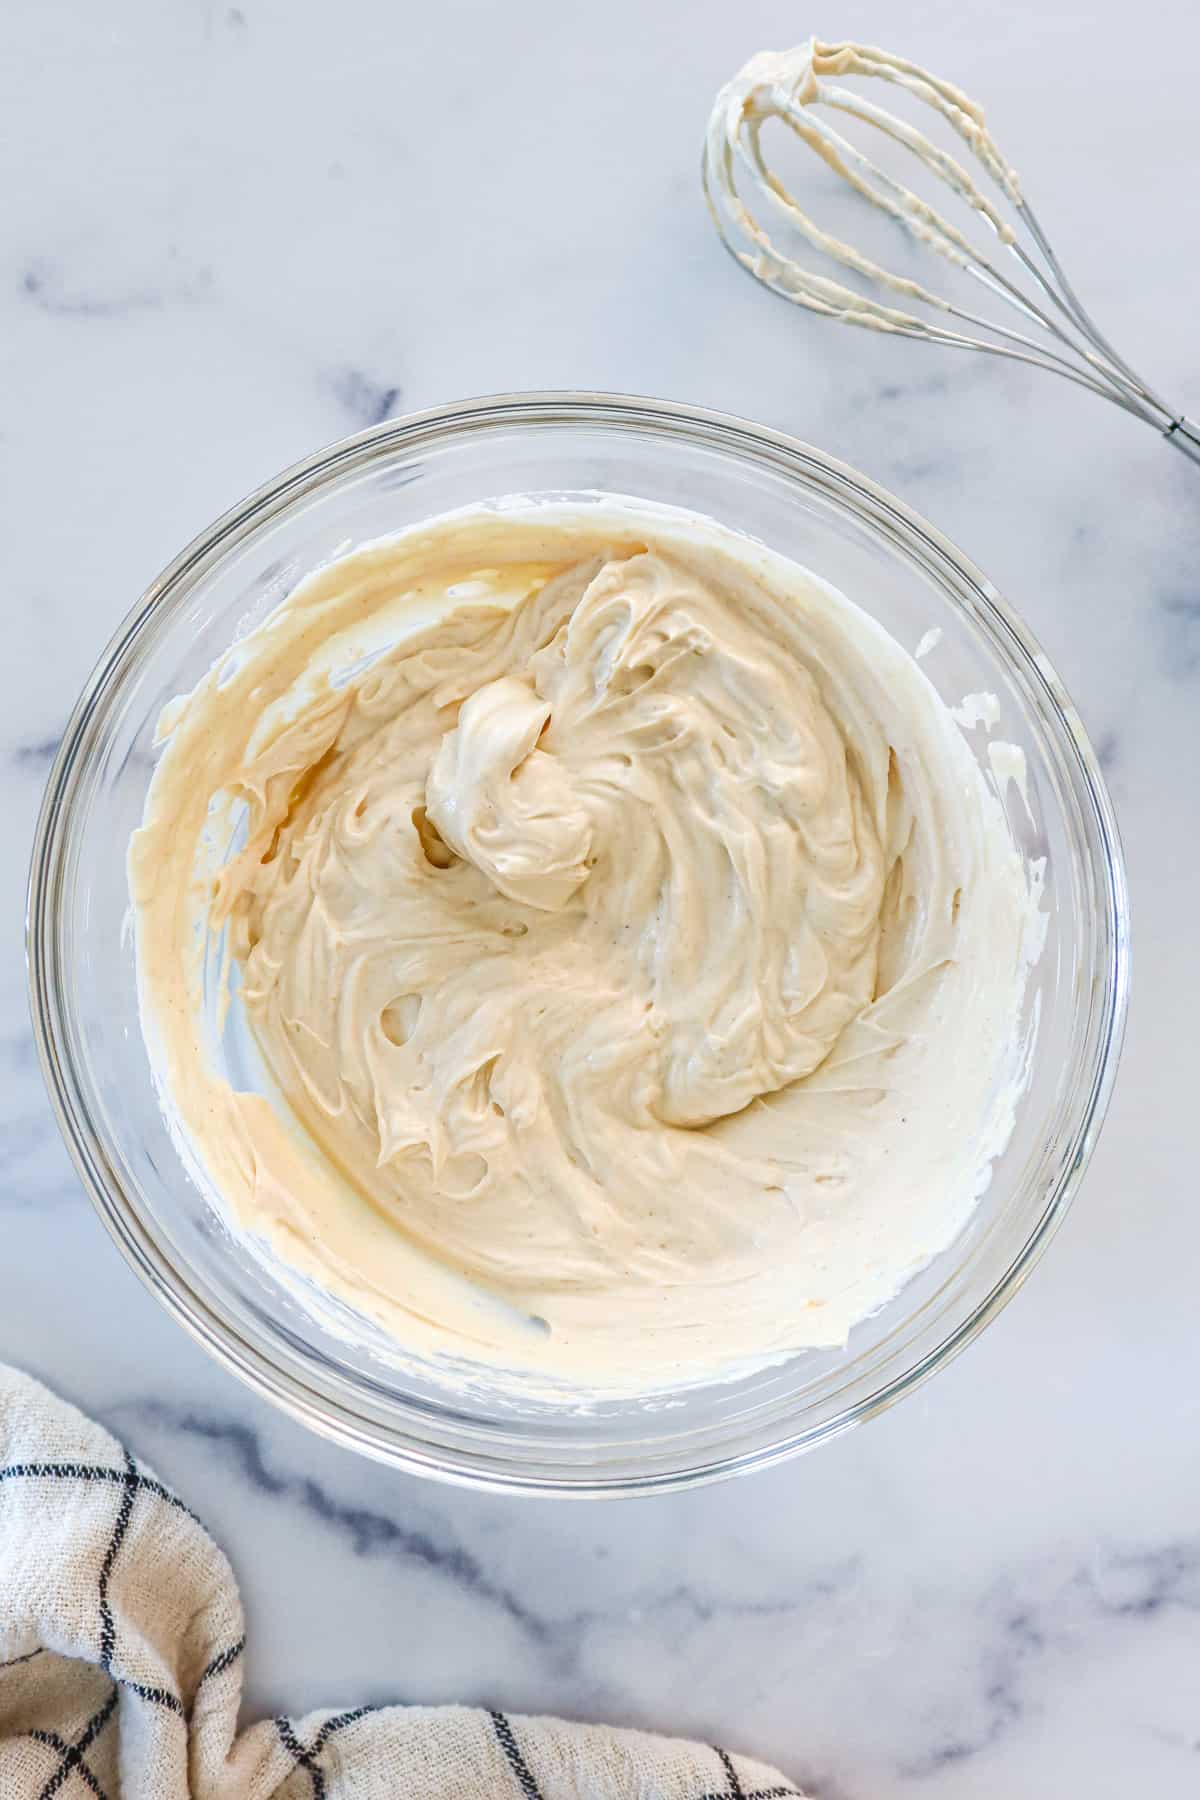 Yogurt peanut butter dip whisked up in a glass mixing bowl.